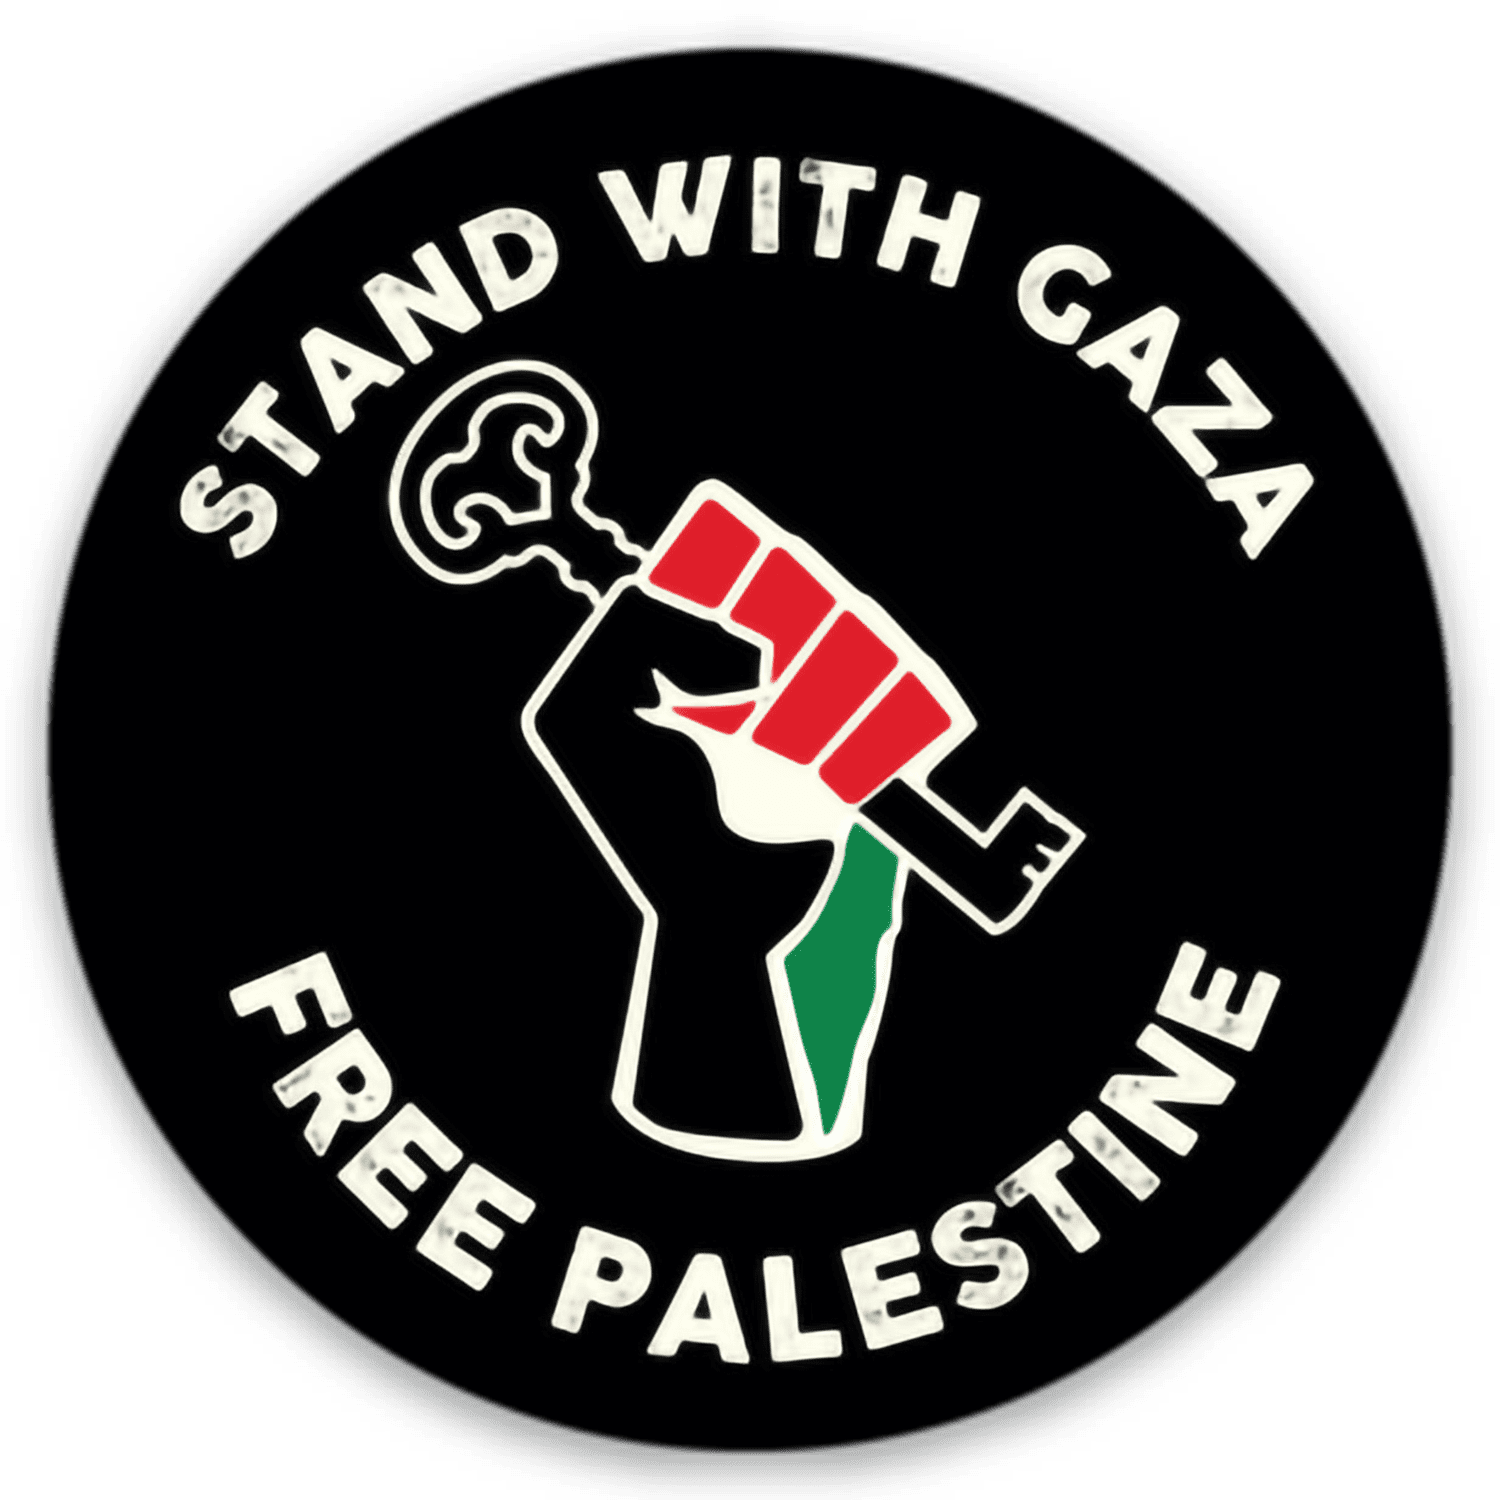 Stand with Gaza Round Stickers (5 Pack)